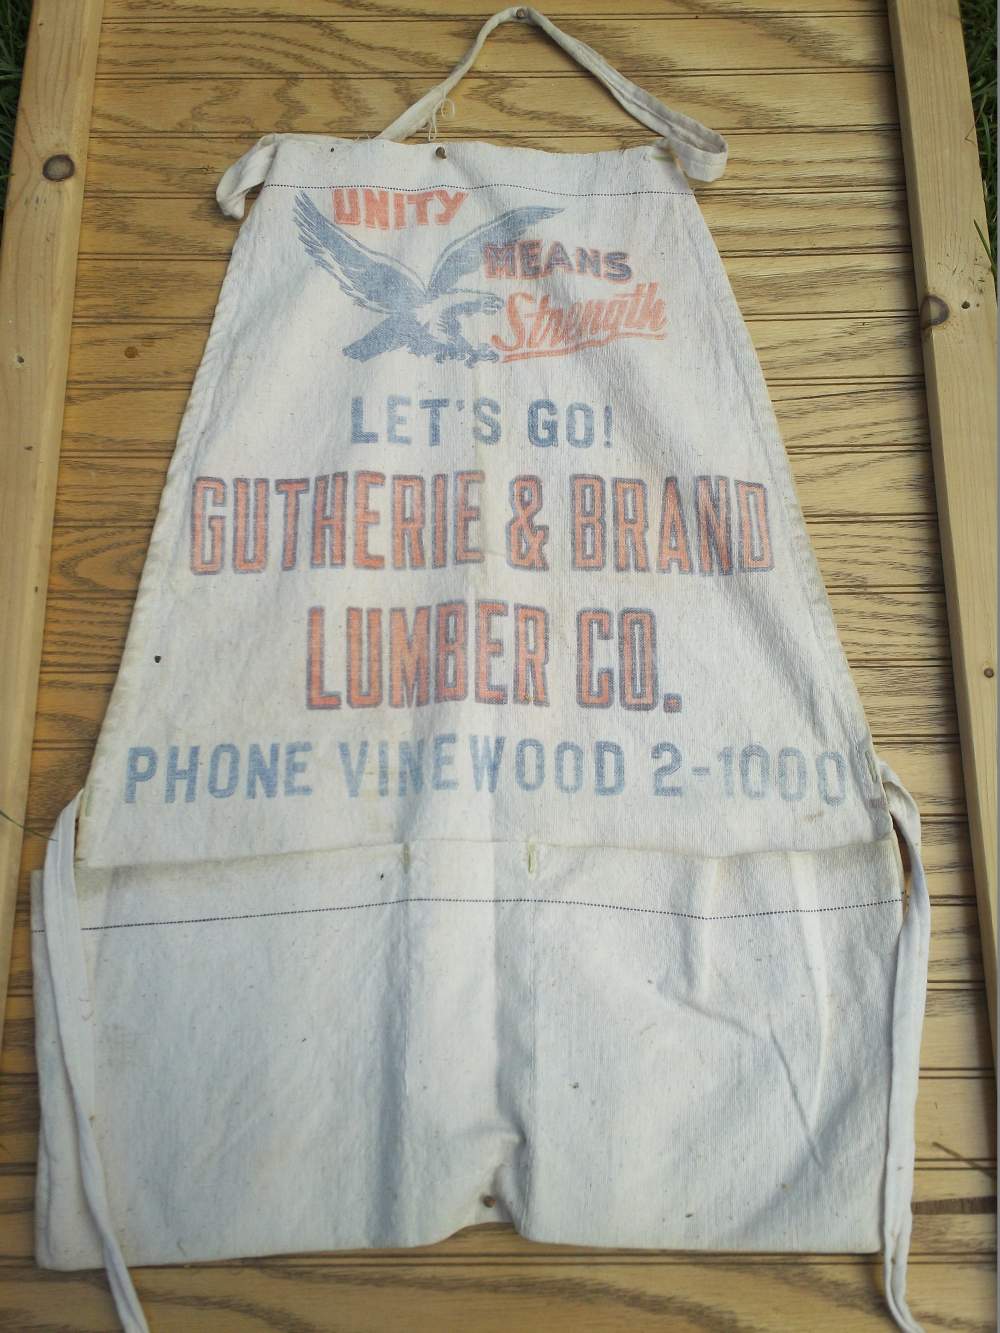 Name:  GLC Gutherie and Brand Lumber.jpg
Views: 803
Size:  142.7 KB